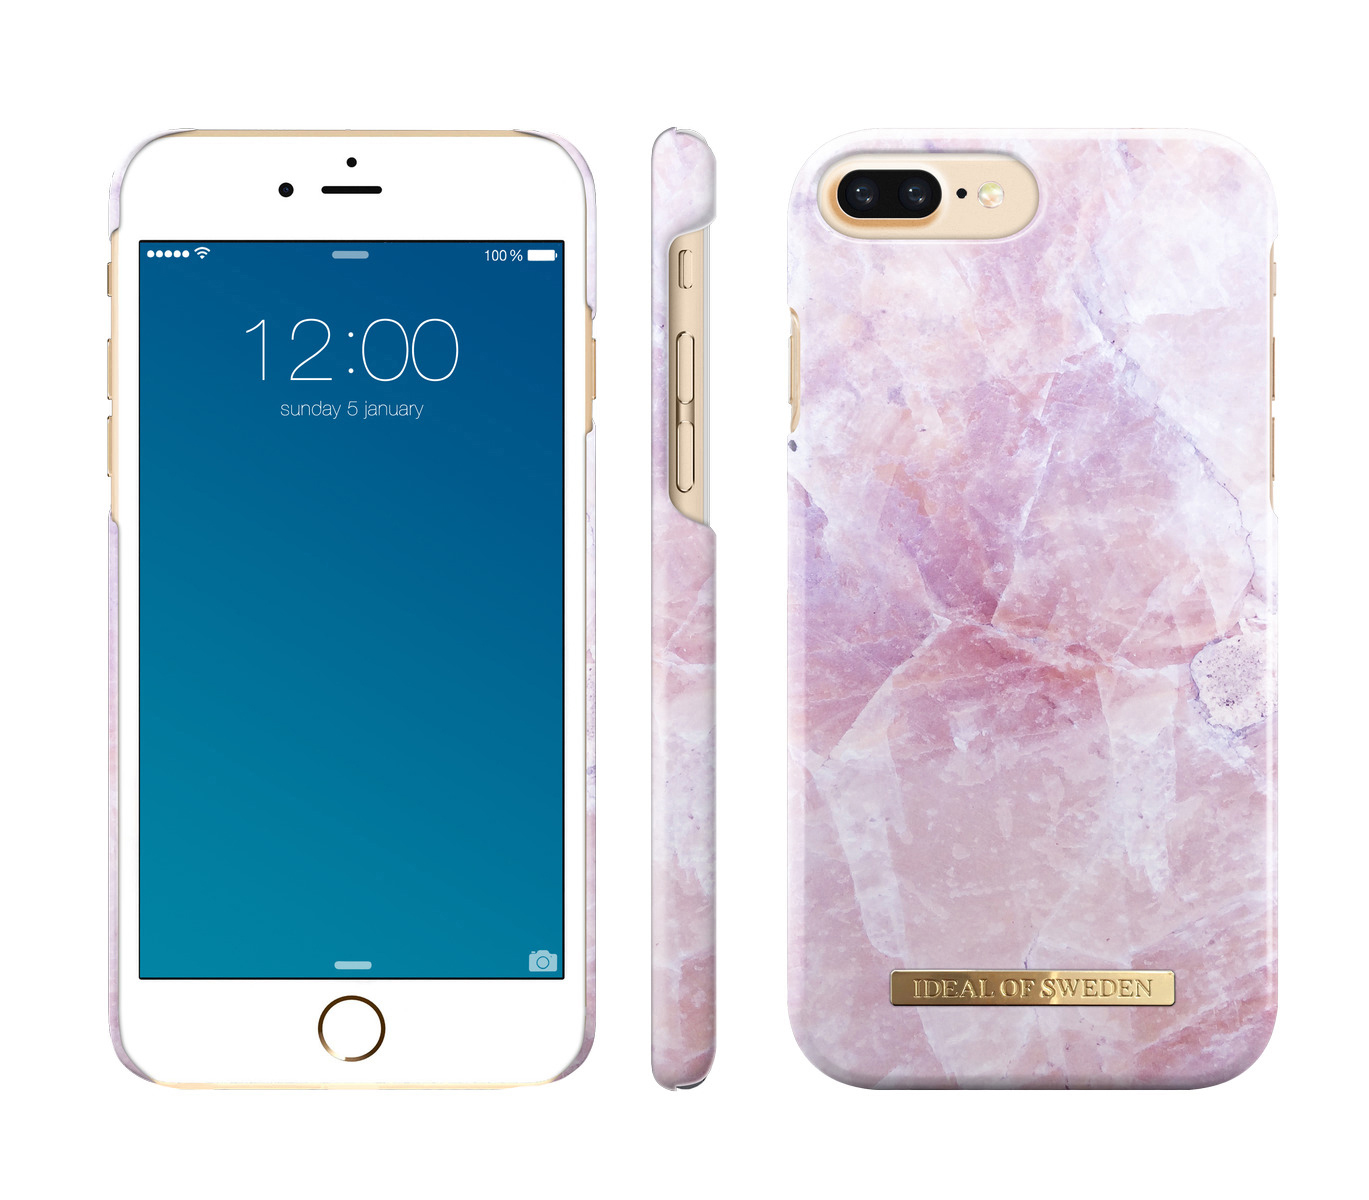 Plus Fashion, 8 Backcover, 7 Marble Apple, ,iPhone Pink Plus, Plus, 6 IDEAL iPhone iPhone SWEDEN OF